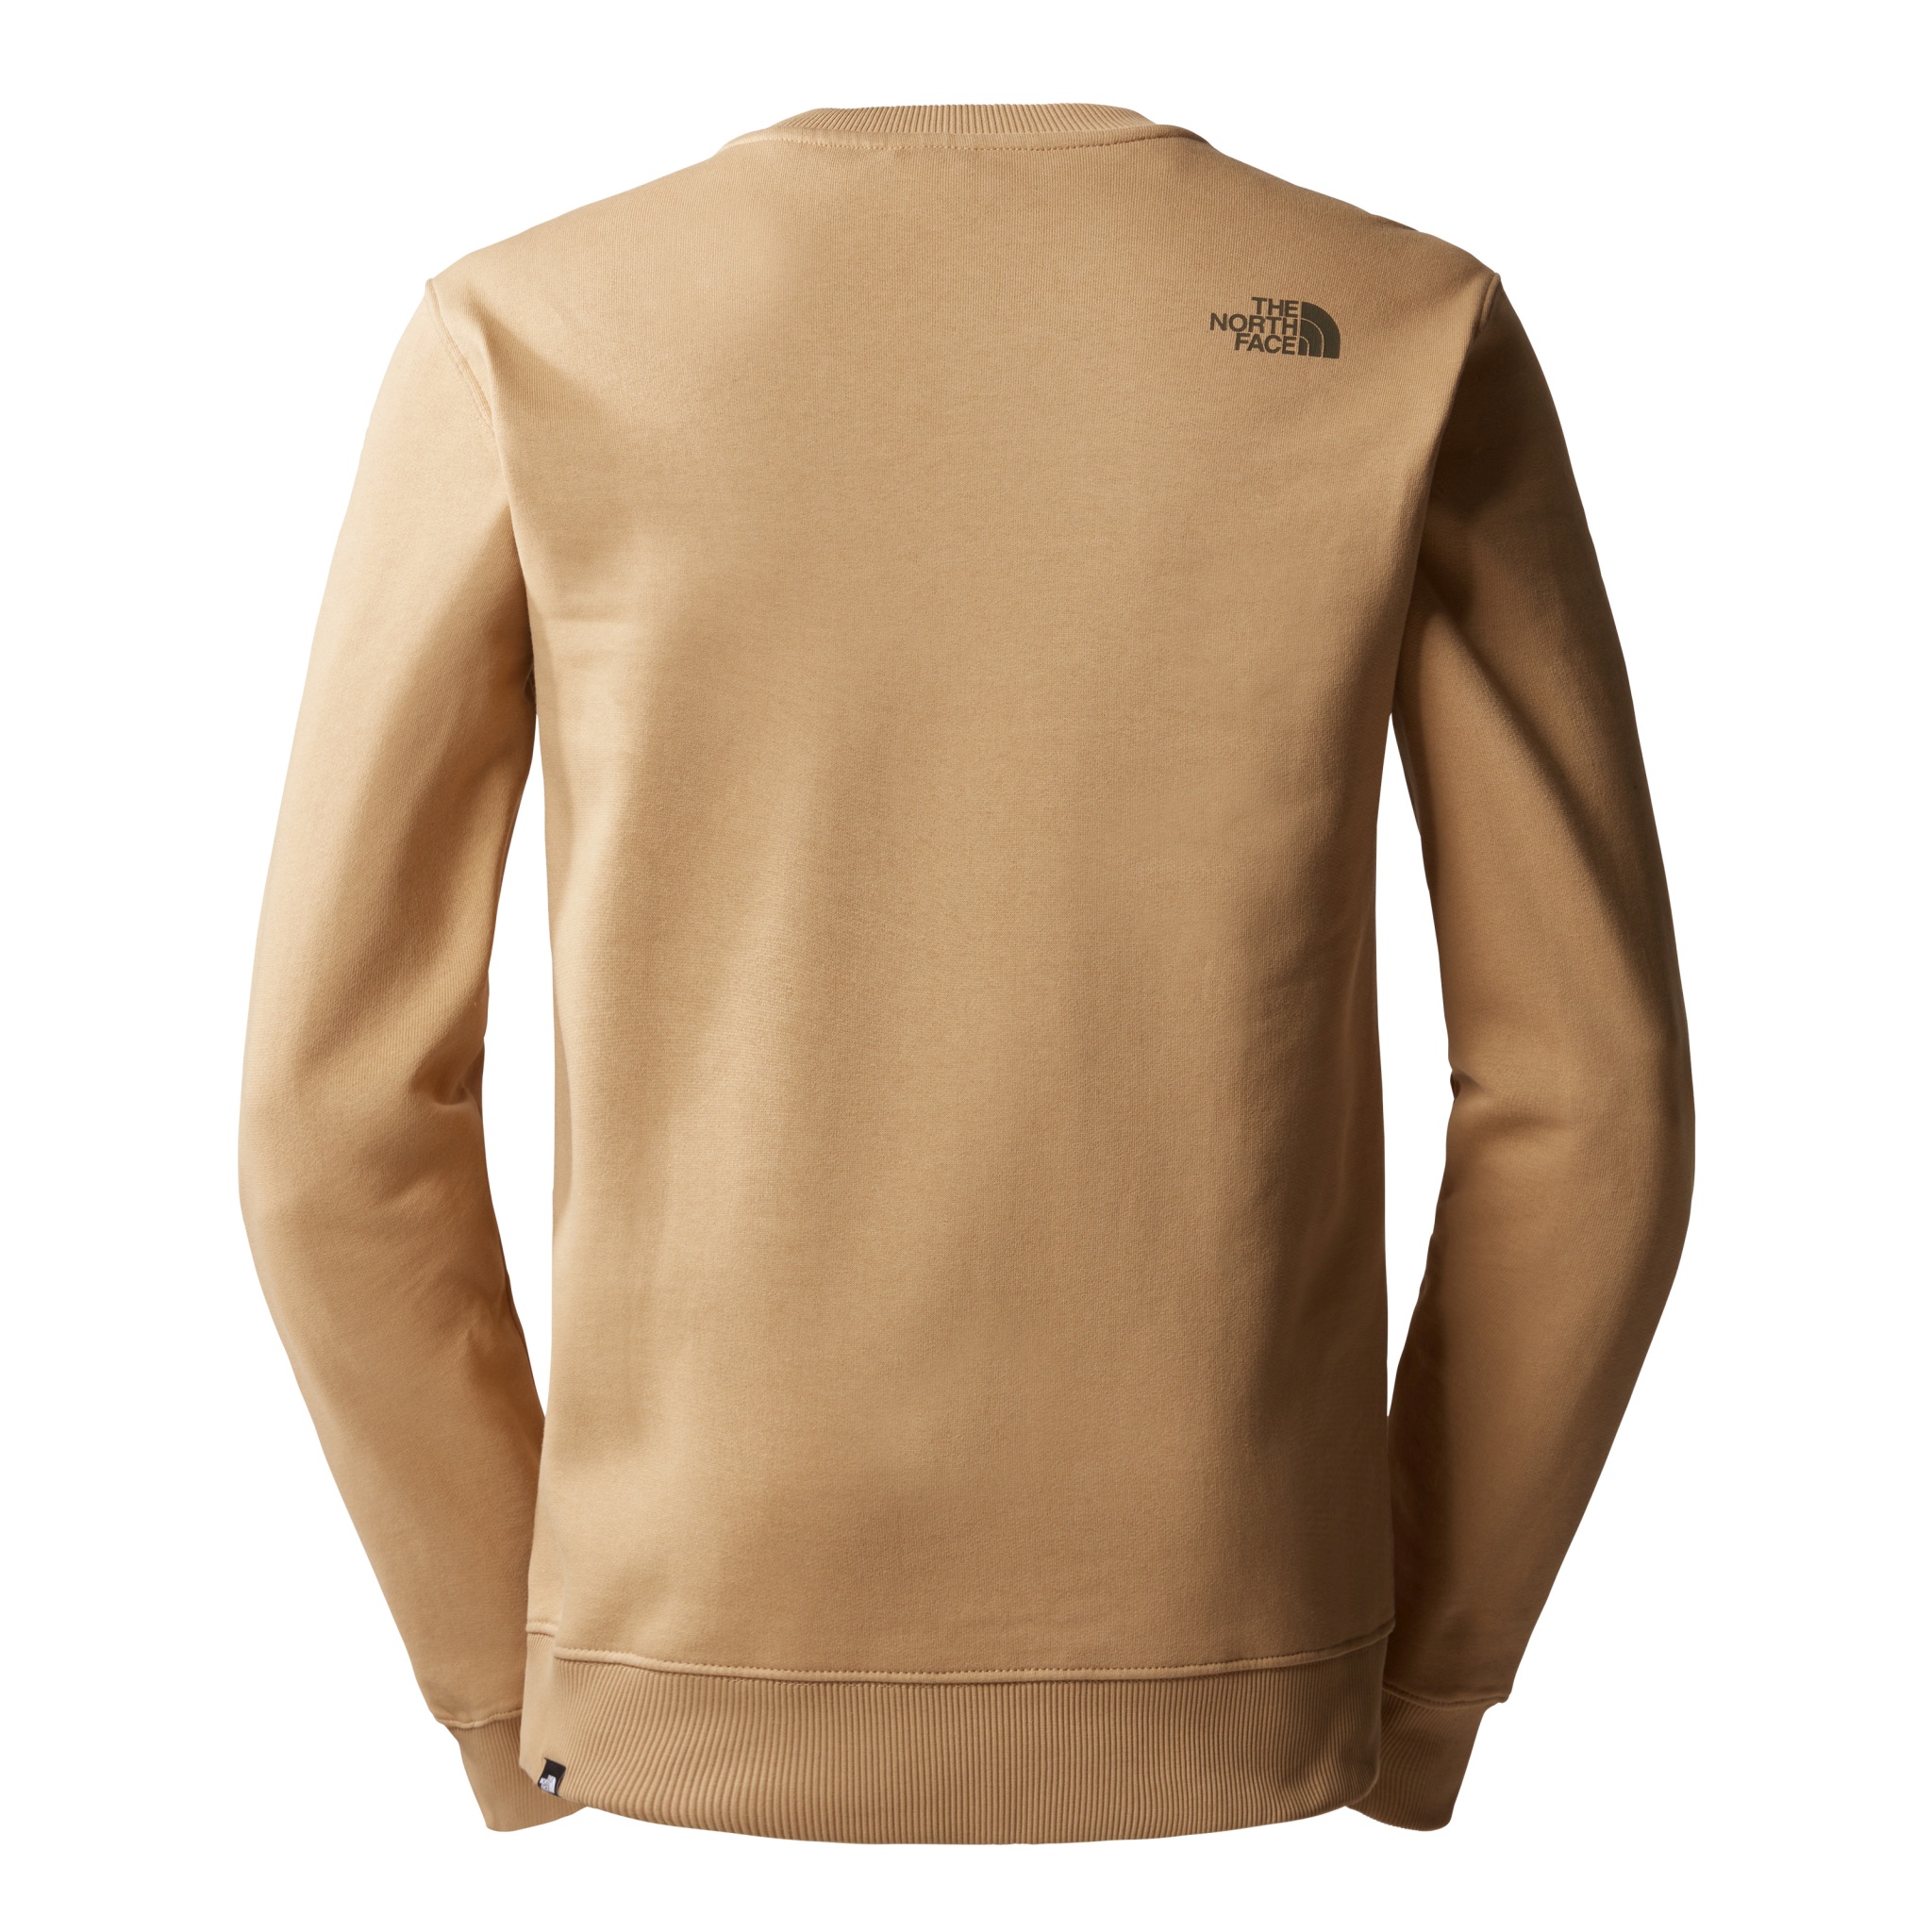 THE NORTH FACE Standard Sweater 10737579